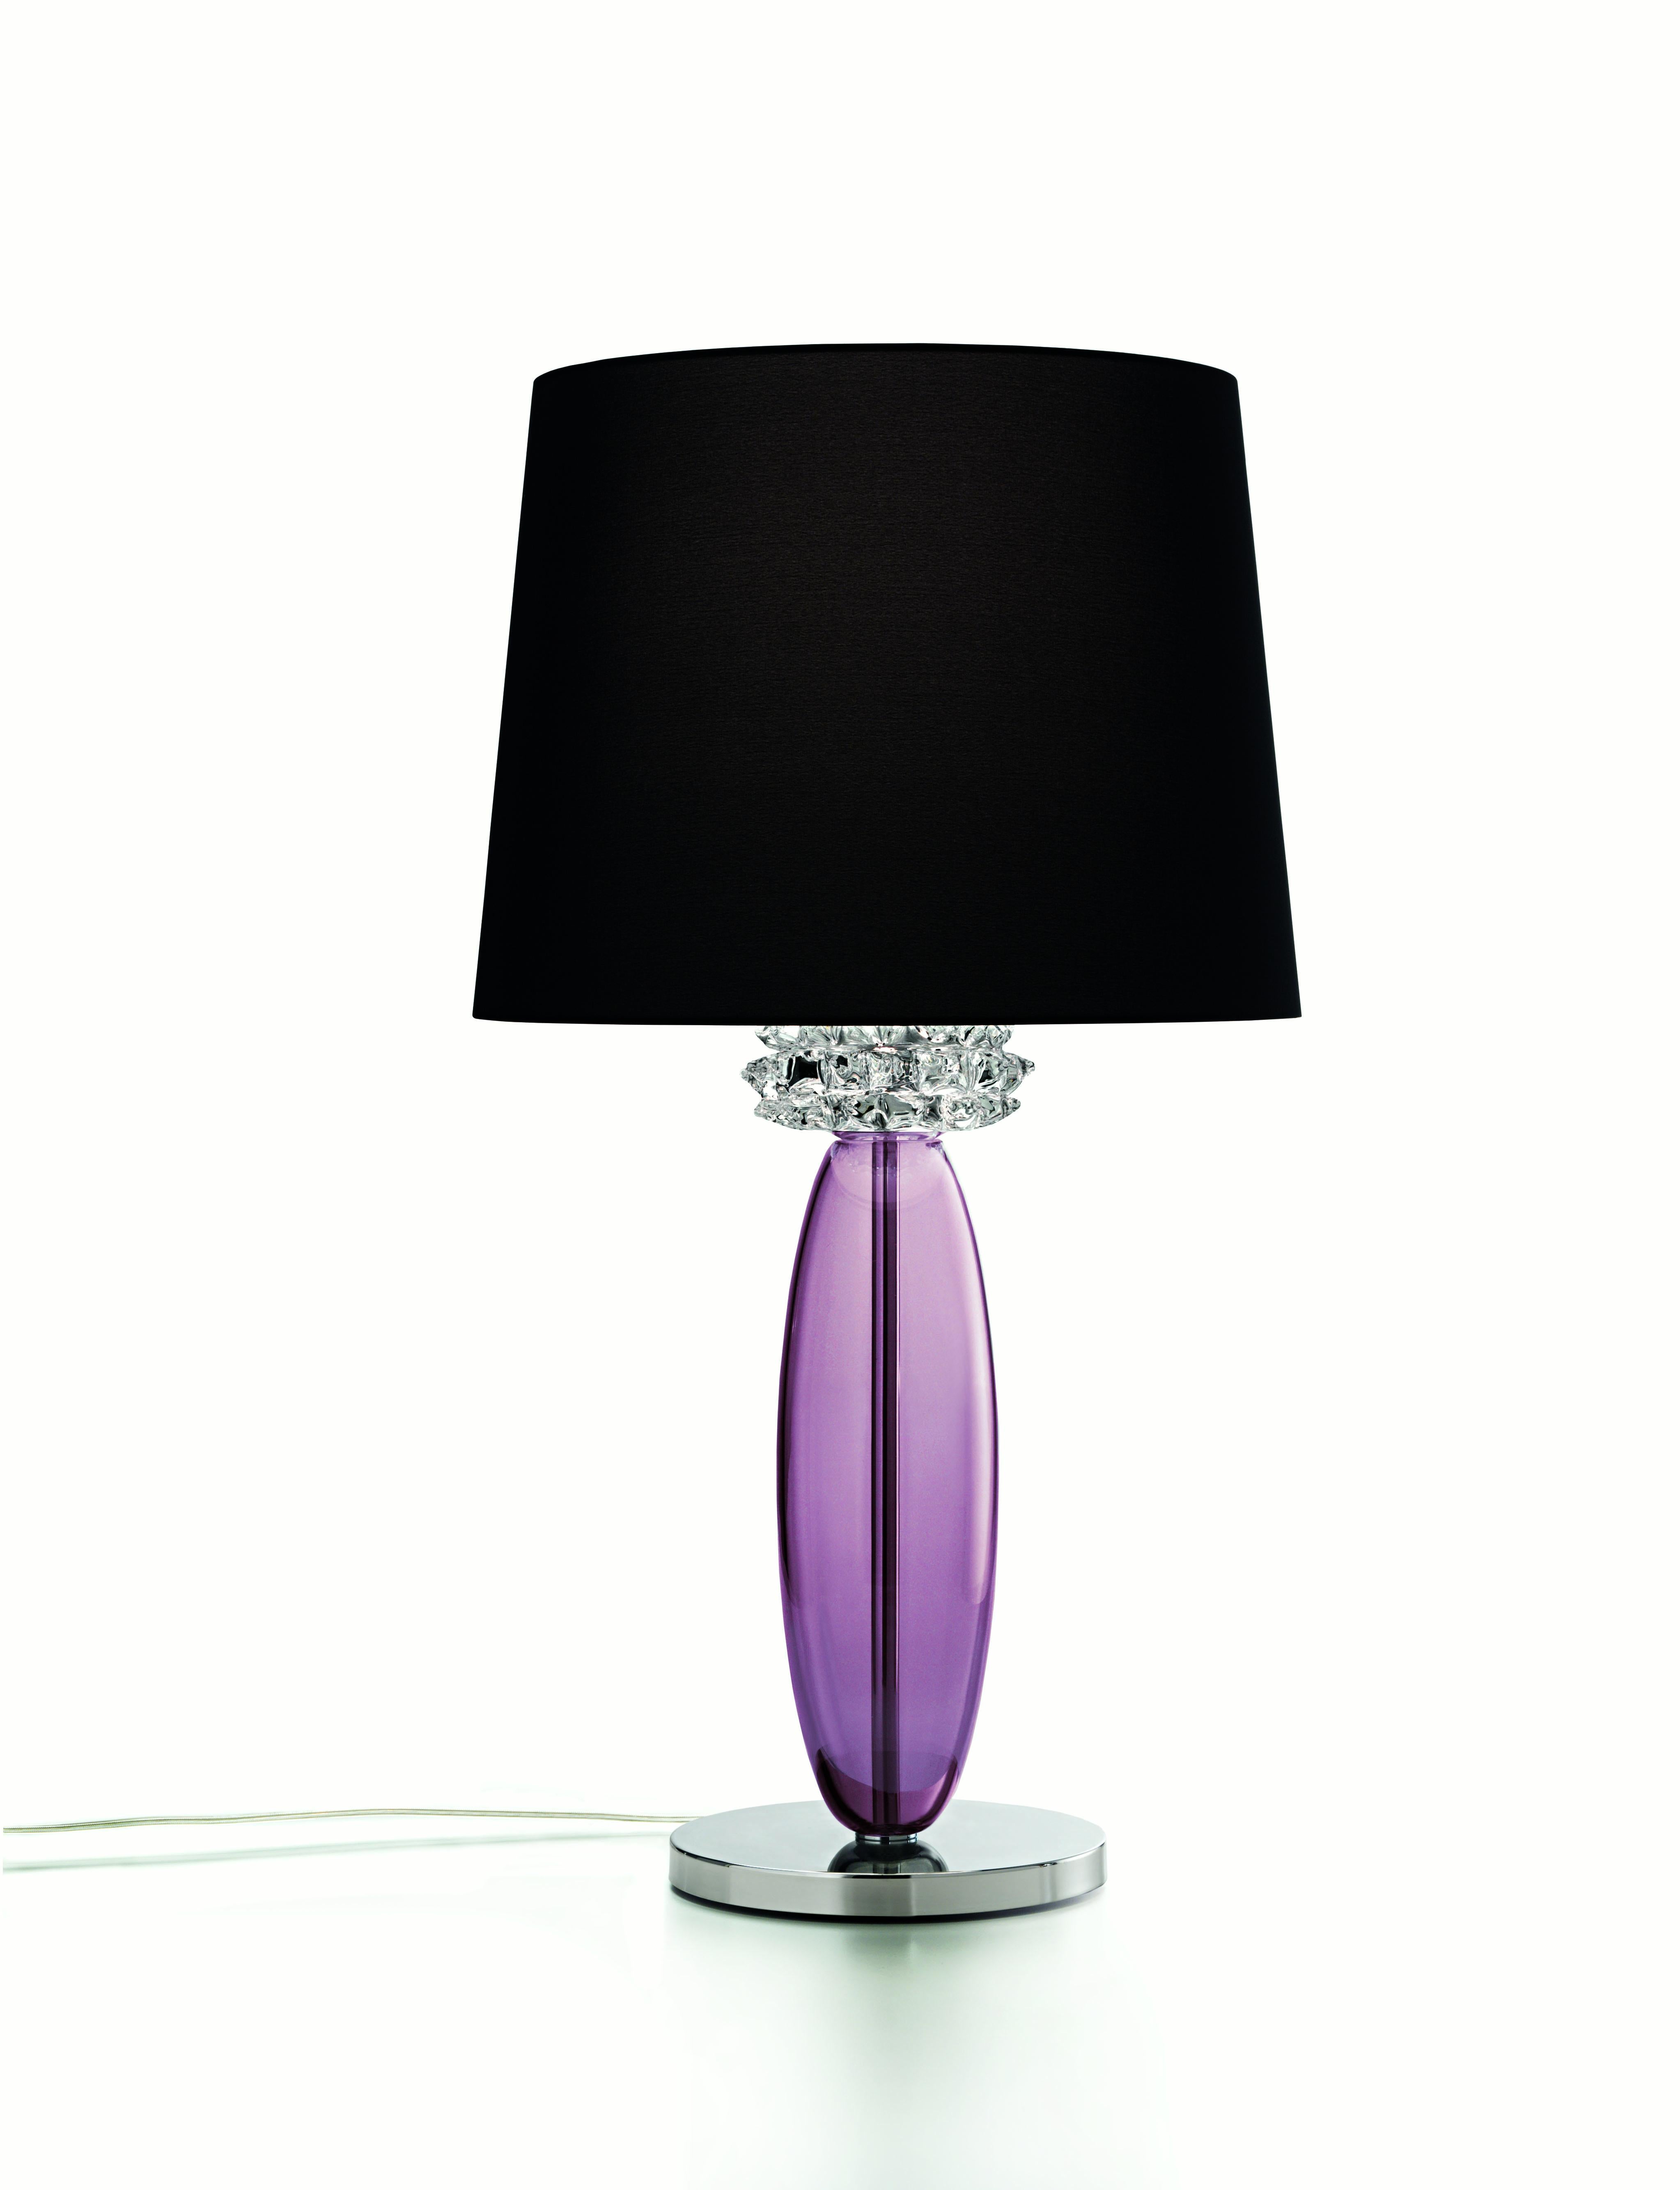 Purple (Violet_VI) Rotterdam 5565 Table Lamp in Glass with Black Shade, by Barovier&Toso 2